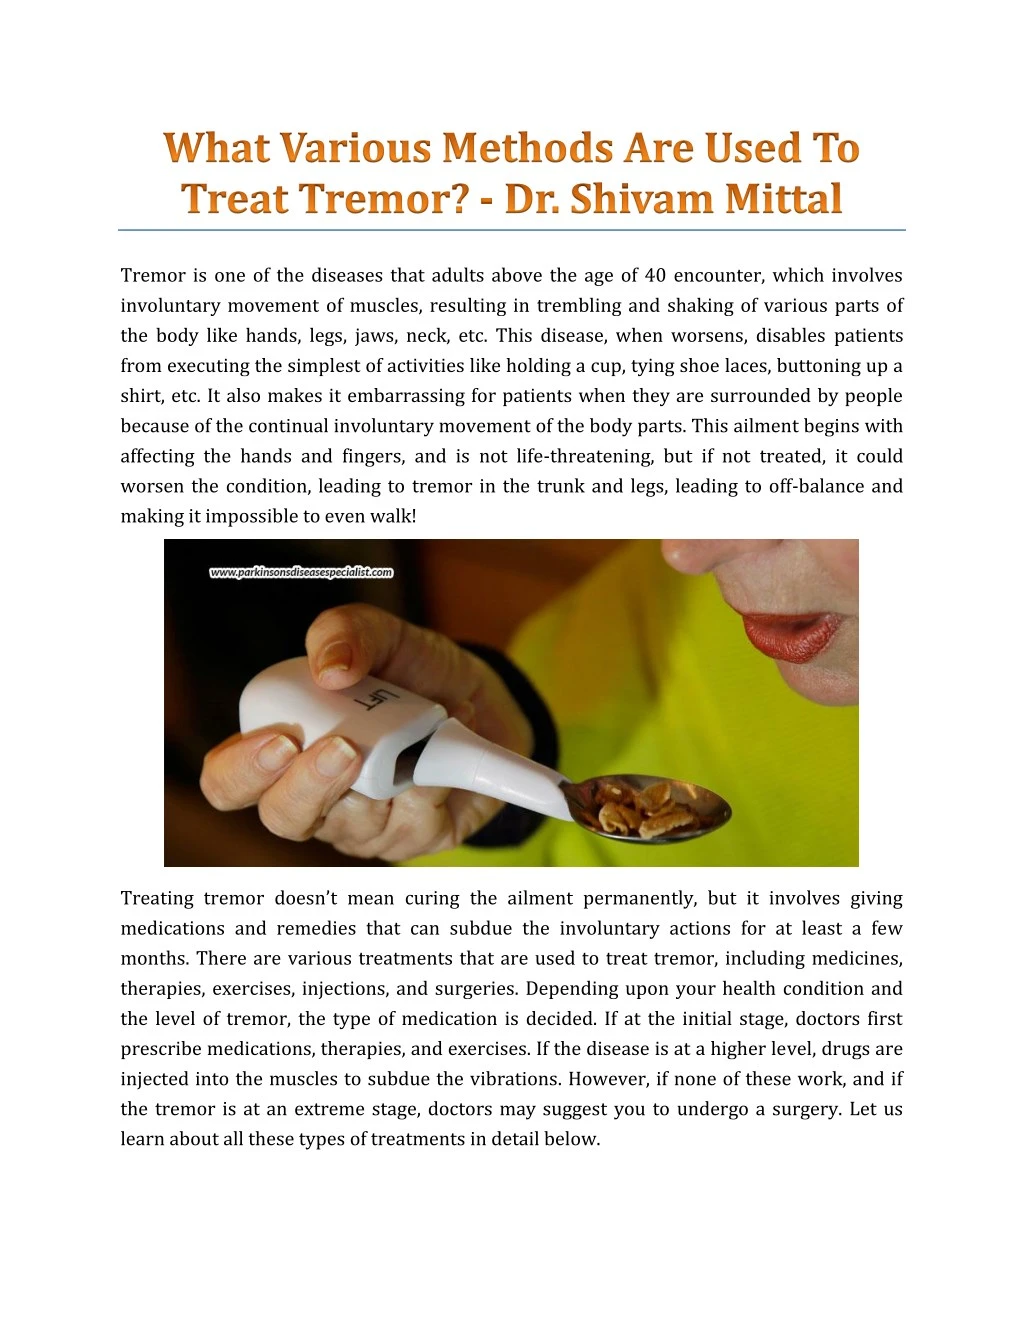 tremor is one of the diseases that adults above